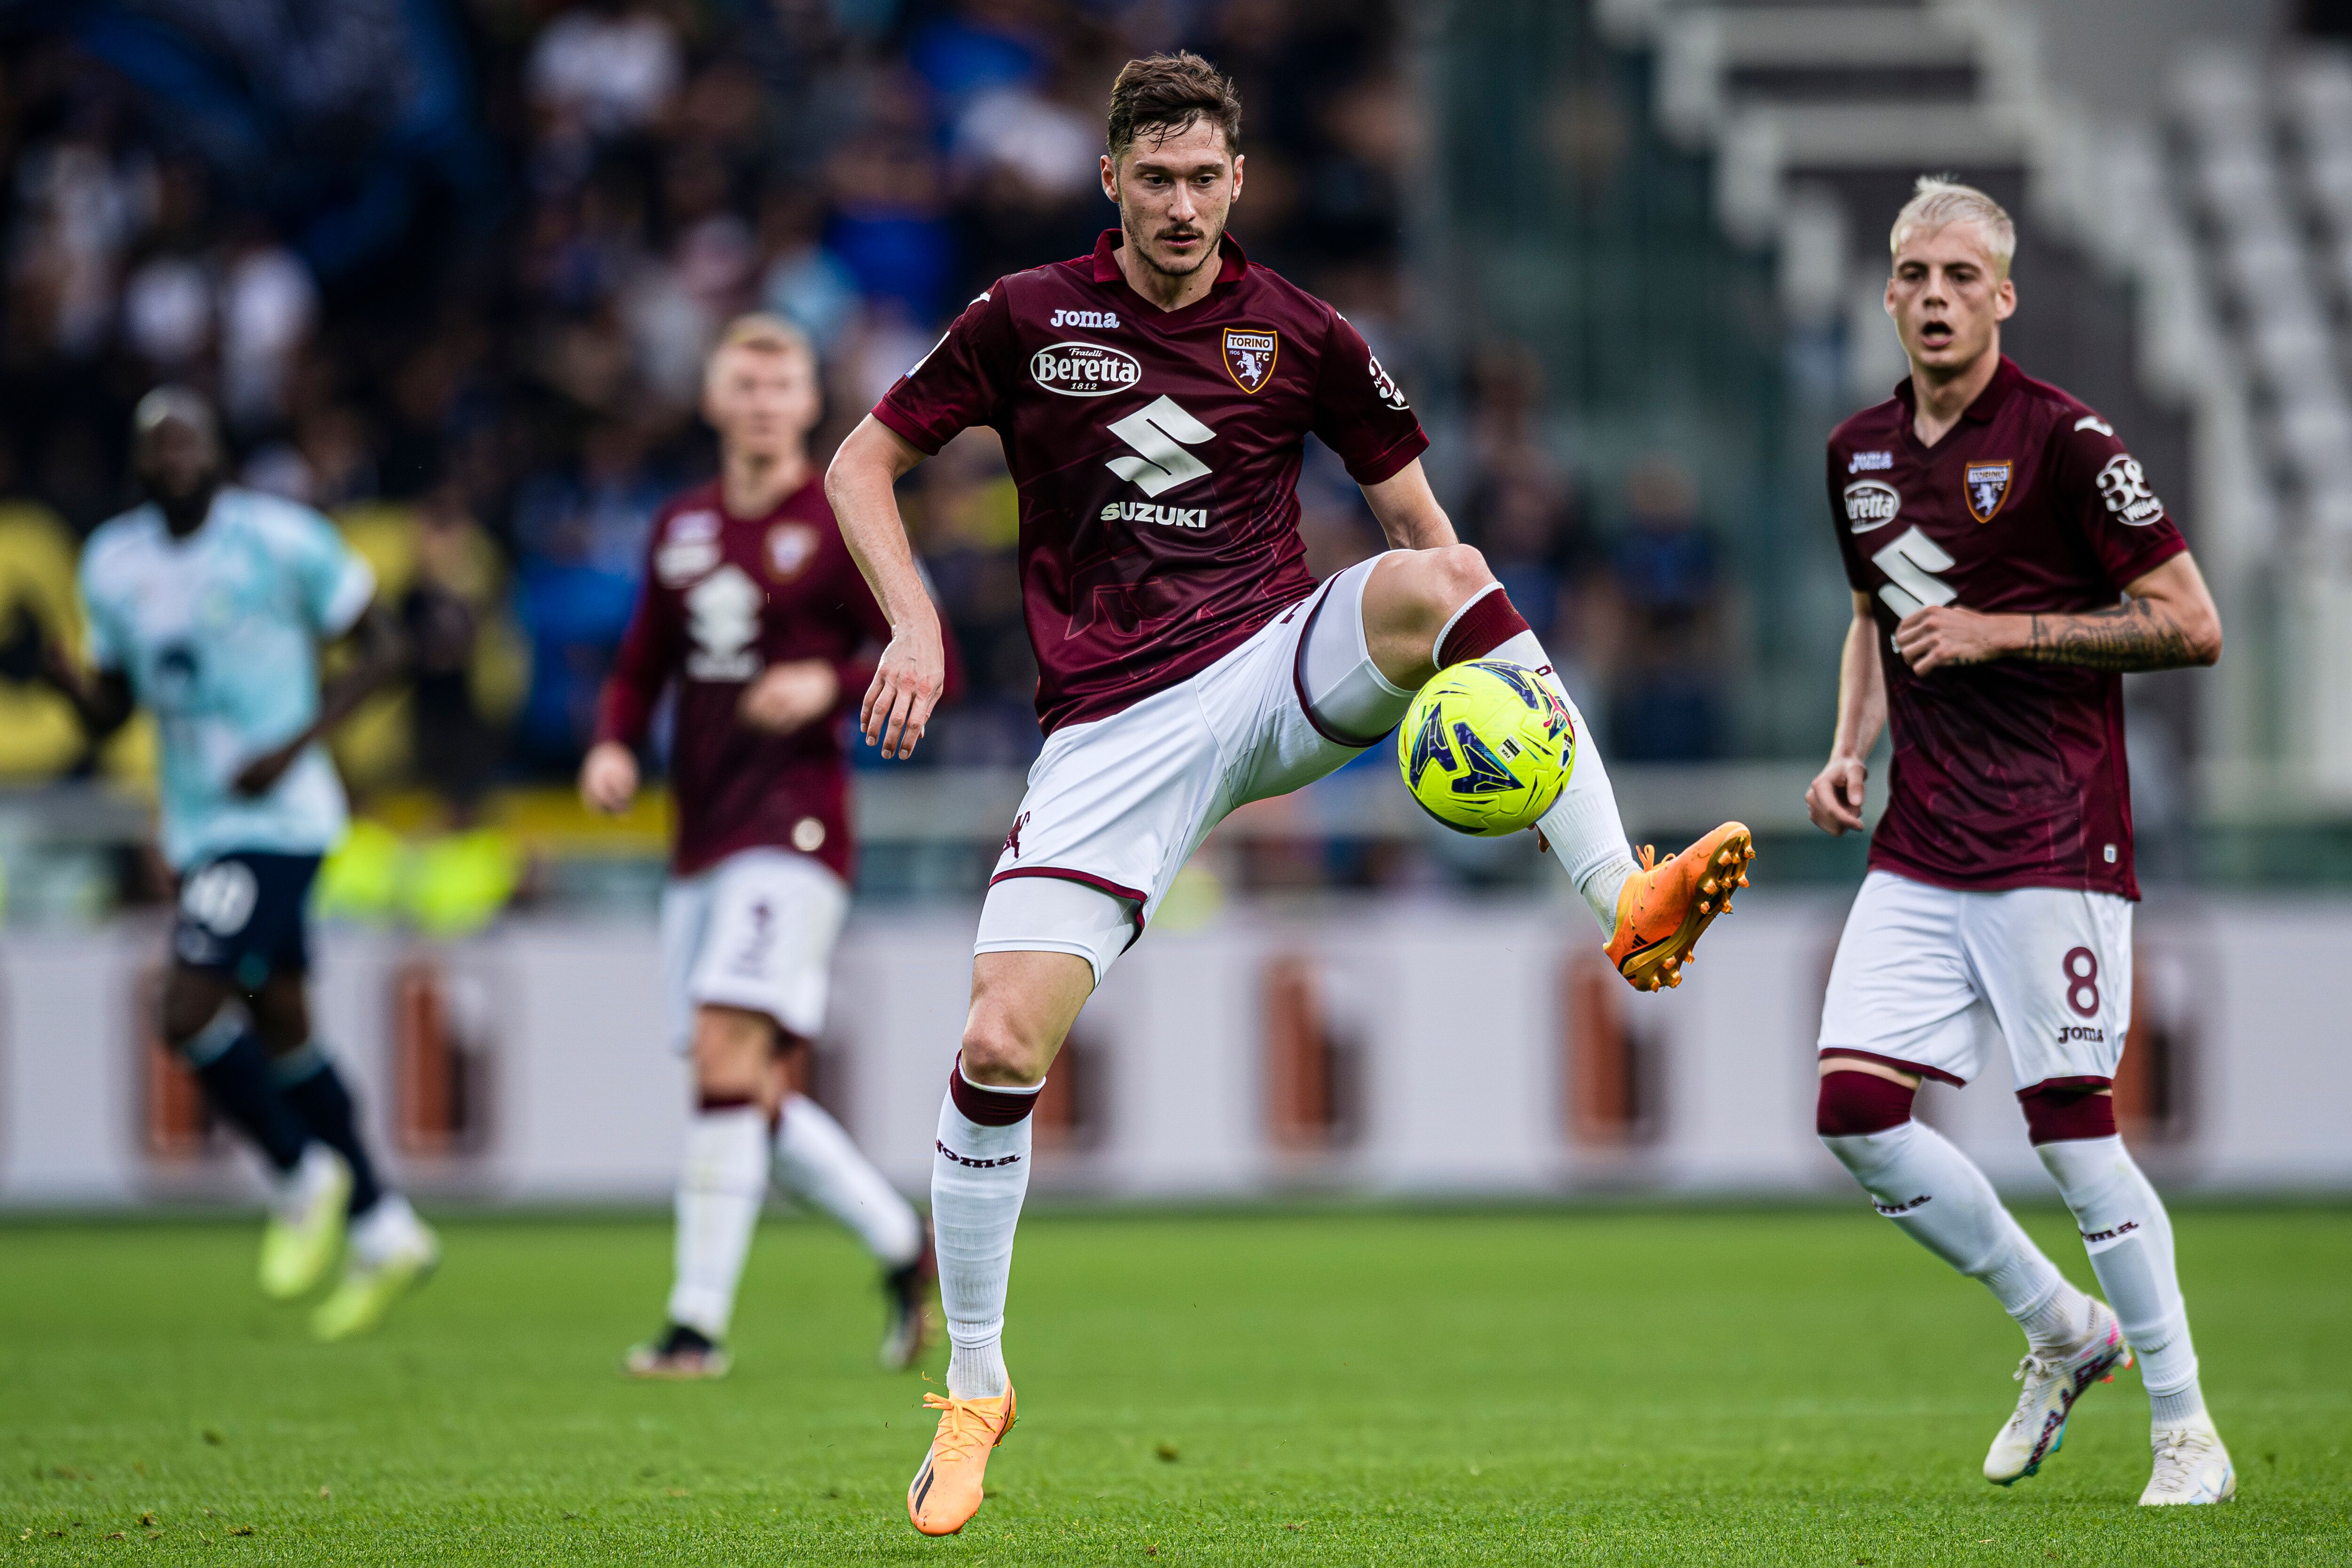 Aleksei Miranchuk of Torino FC in action during the Serie A football match between Torino FC and FC Internazionale.